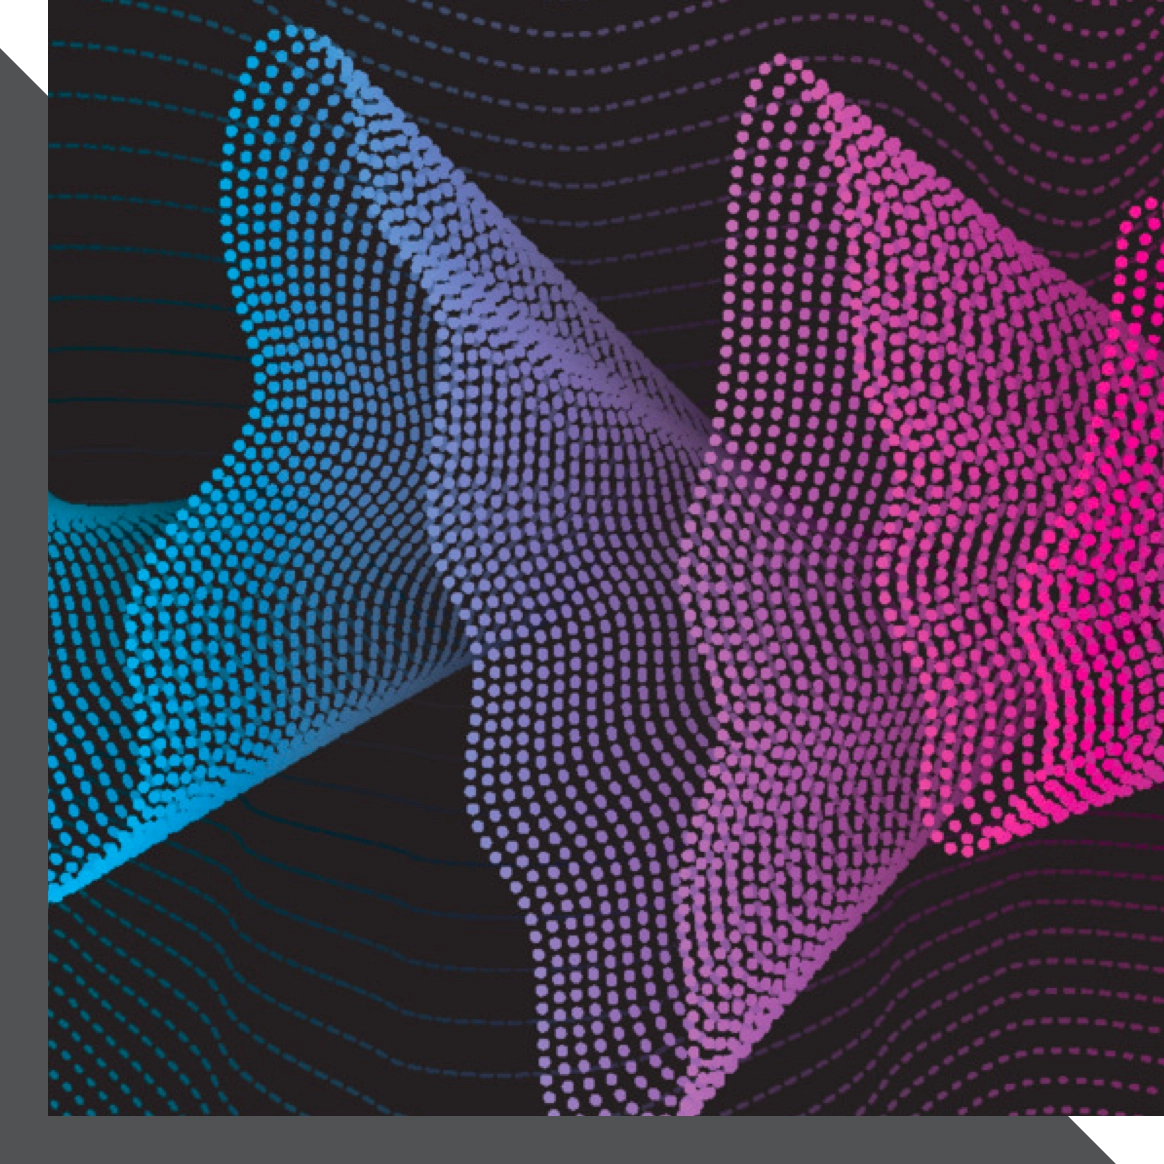 Abstract digital artwork featuring two intersecting wave-like structures composed of small dots. The structure on the left is composed of blue and green dots, while the structure on the right is made up of pink and purple dots, all set against a dark background.